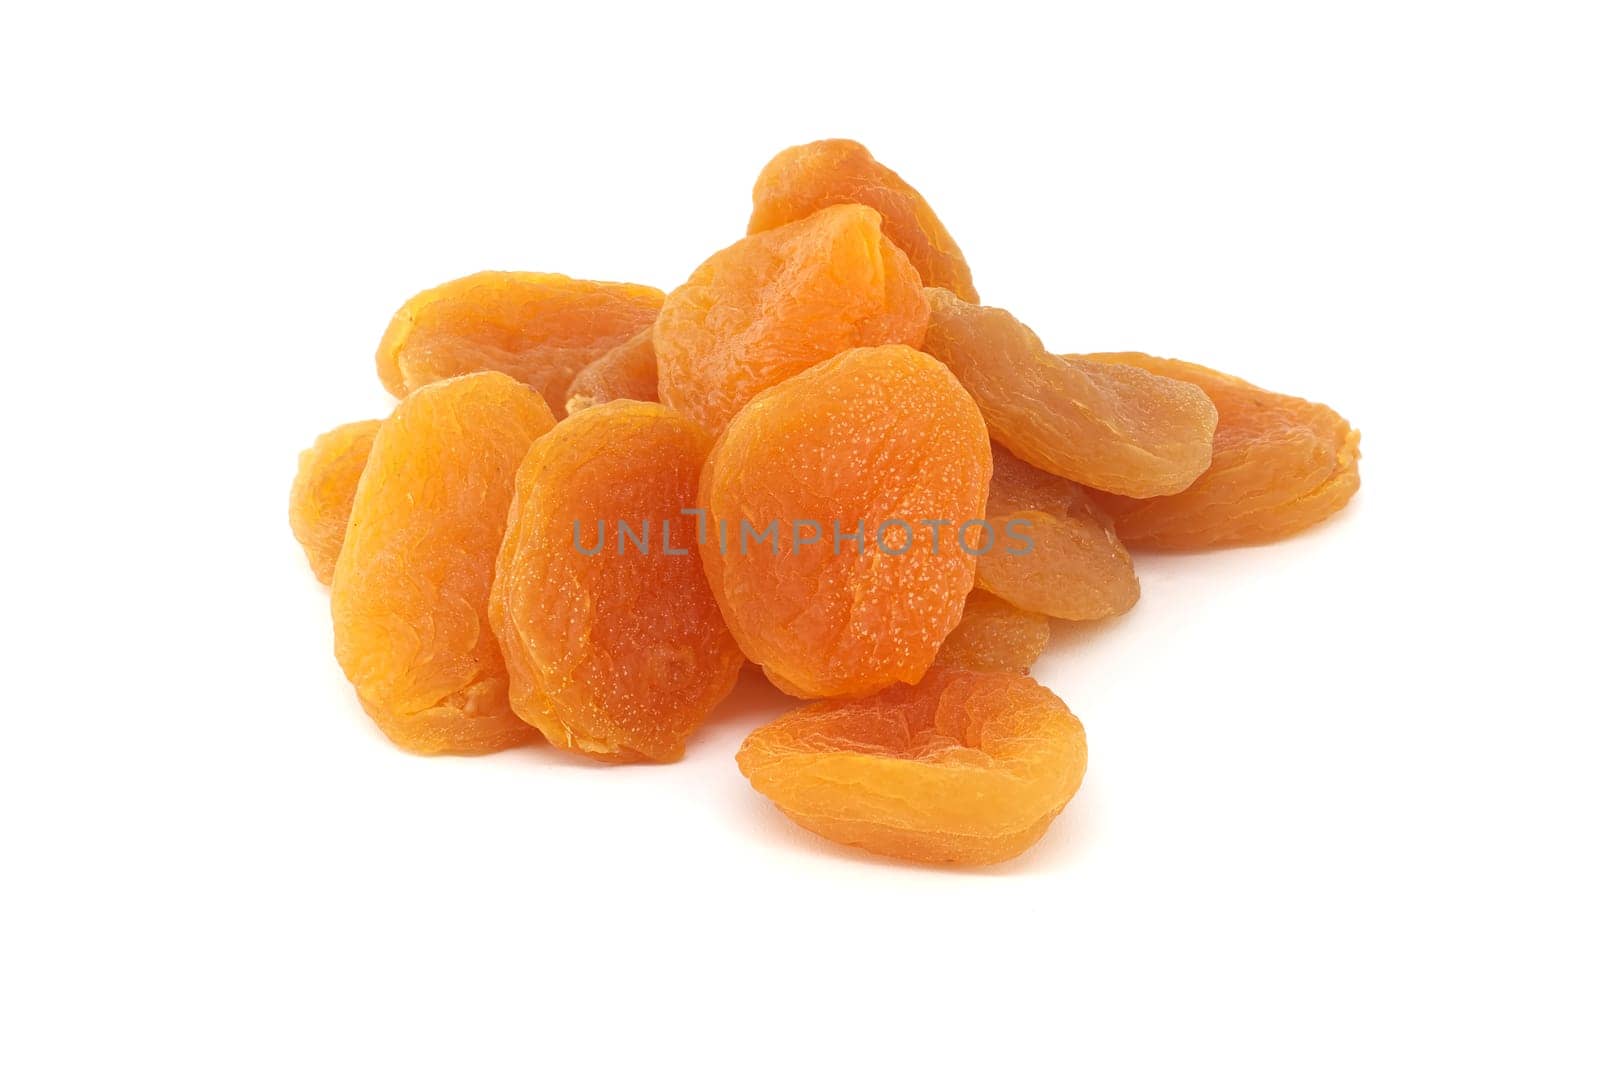 Dried apricots fruits isolated on white background by NetPix